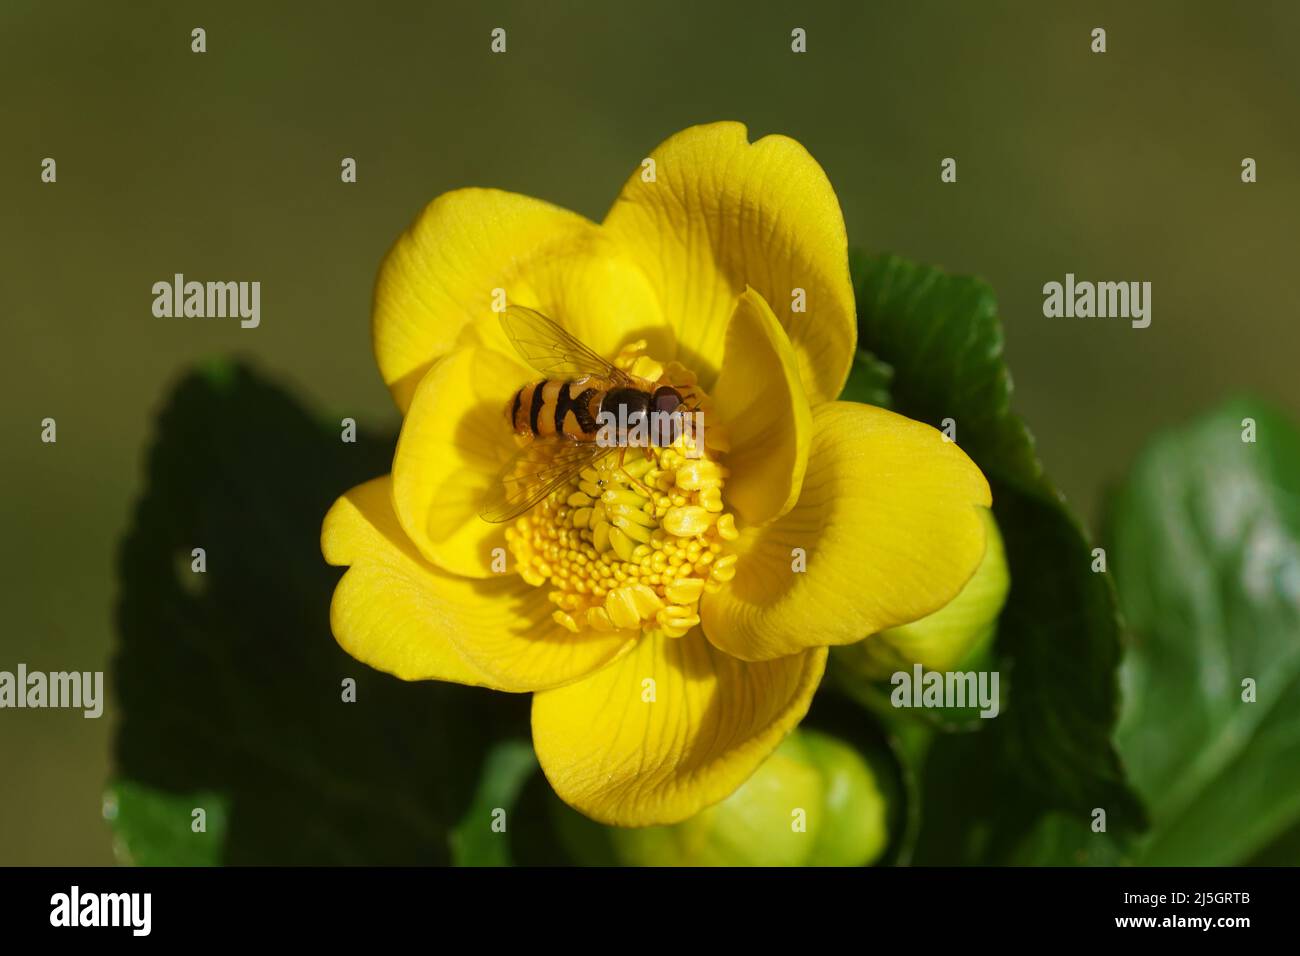 Male hoverfly Epistrophe melanostoma of family Syrphidae on a flower of marsh-marigold or kingcup (Caltha palustris) of the buttercup family Stock Photo